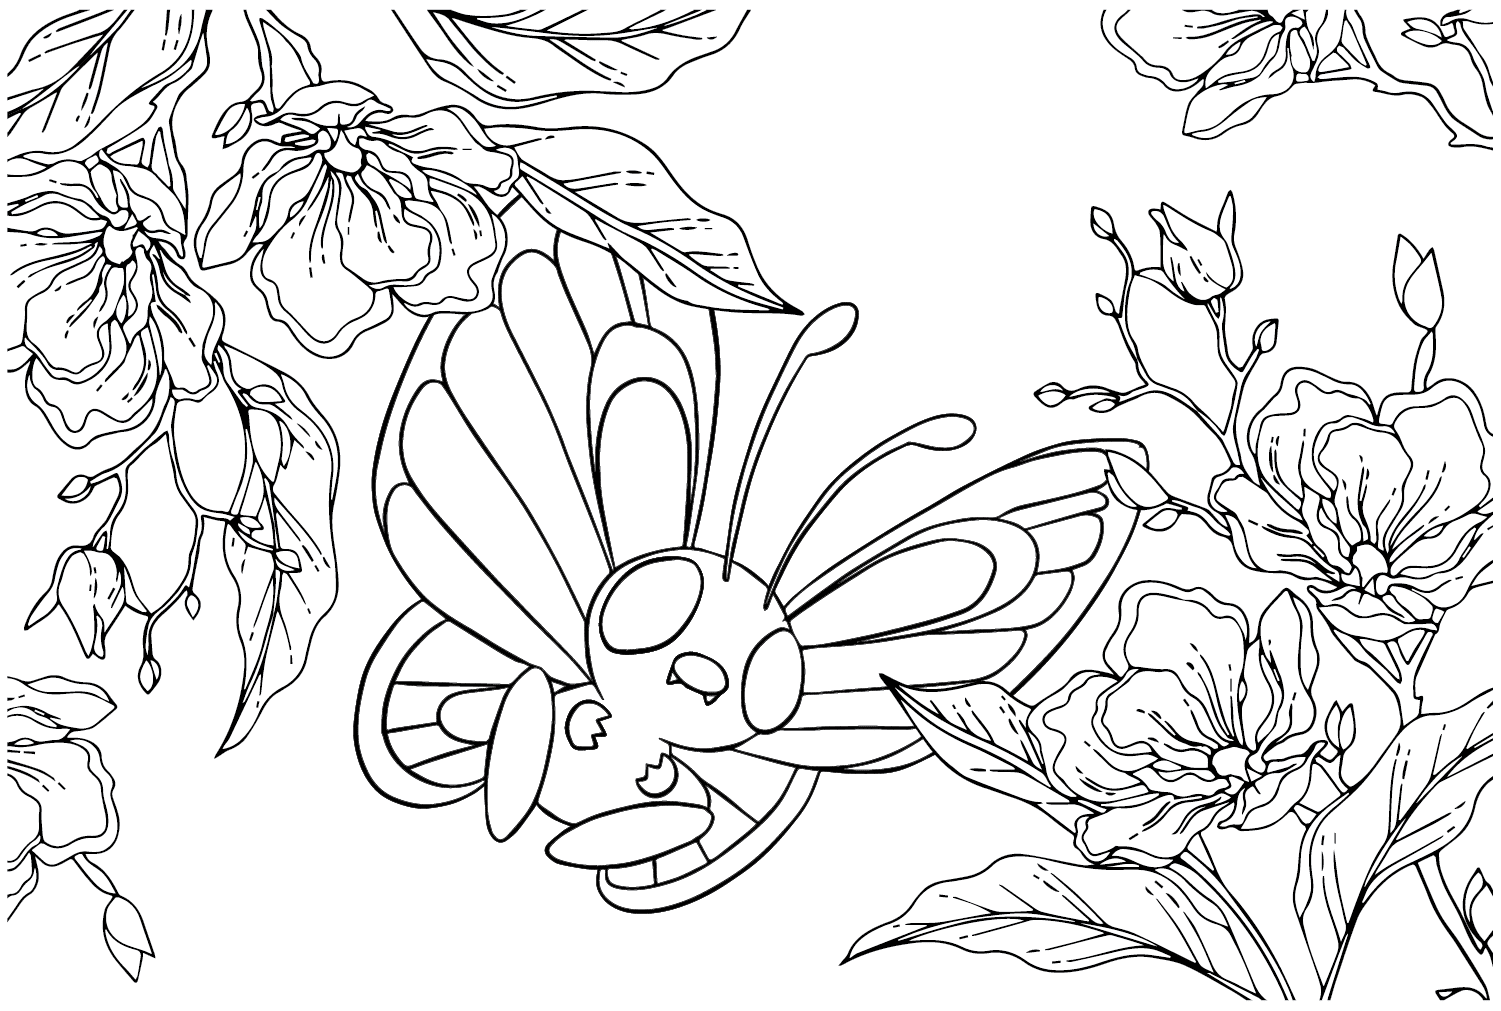 Free Butterfree Coloring Page from Butterfree